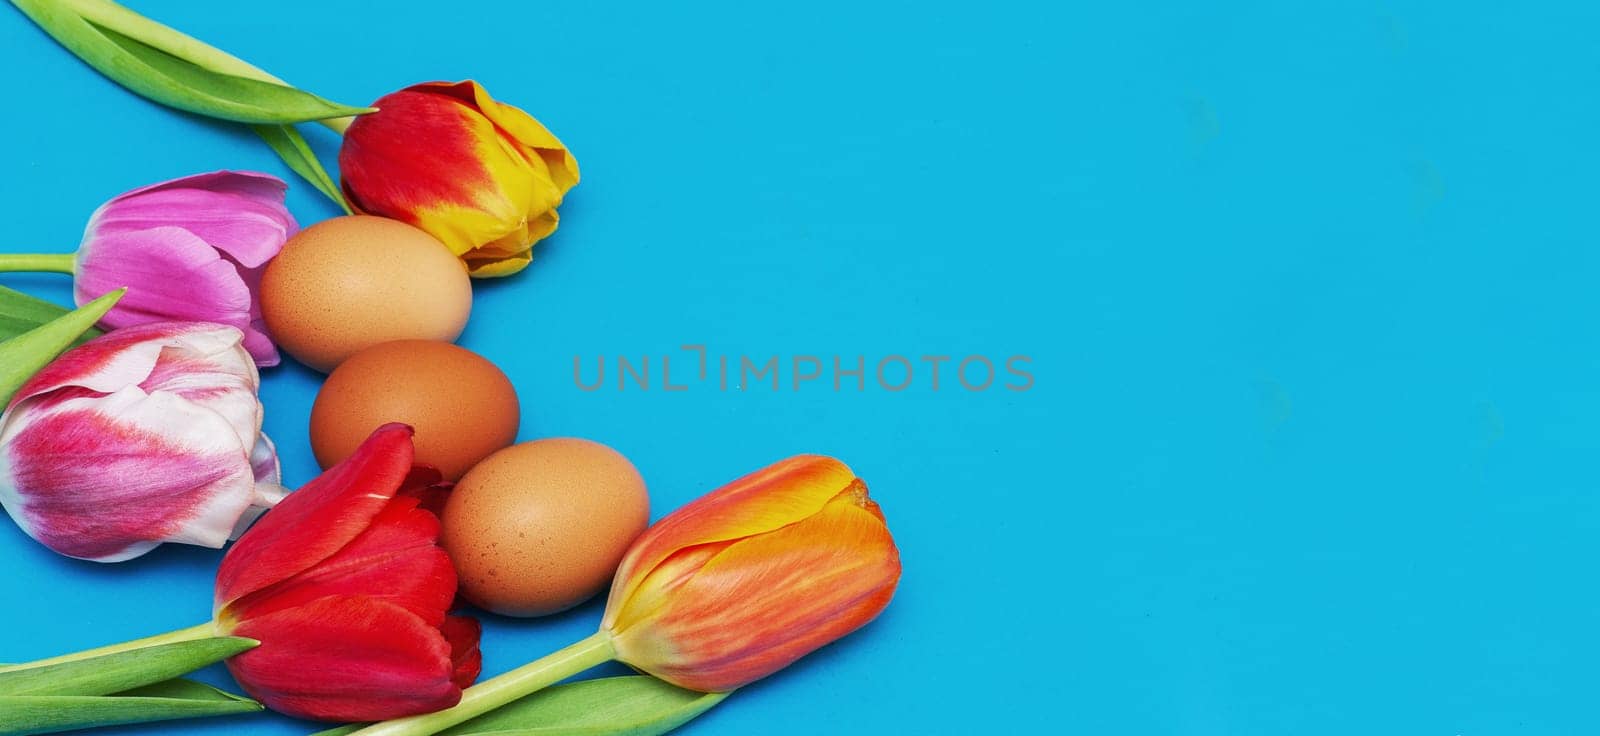 Red tulips and eggs on a blue background by gelog67